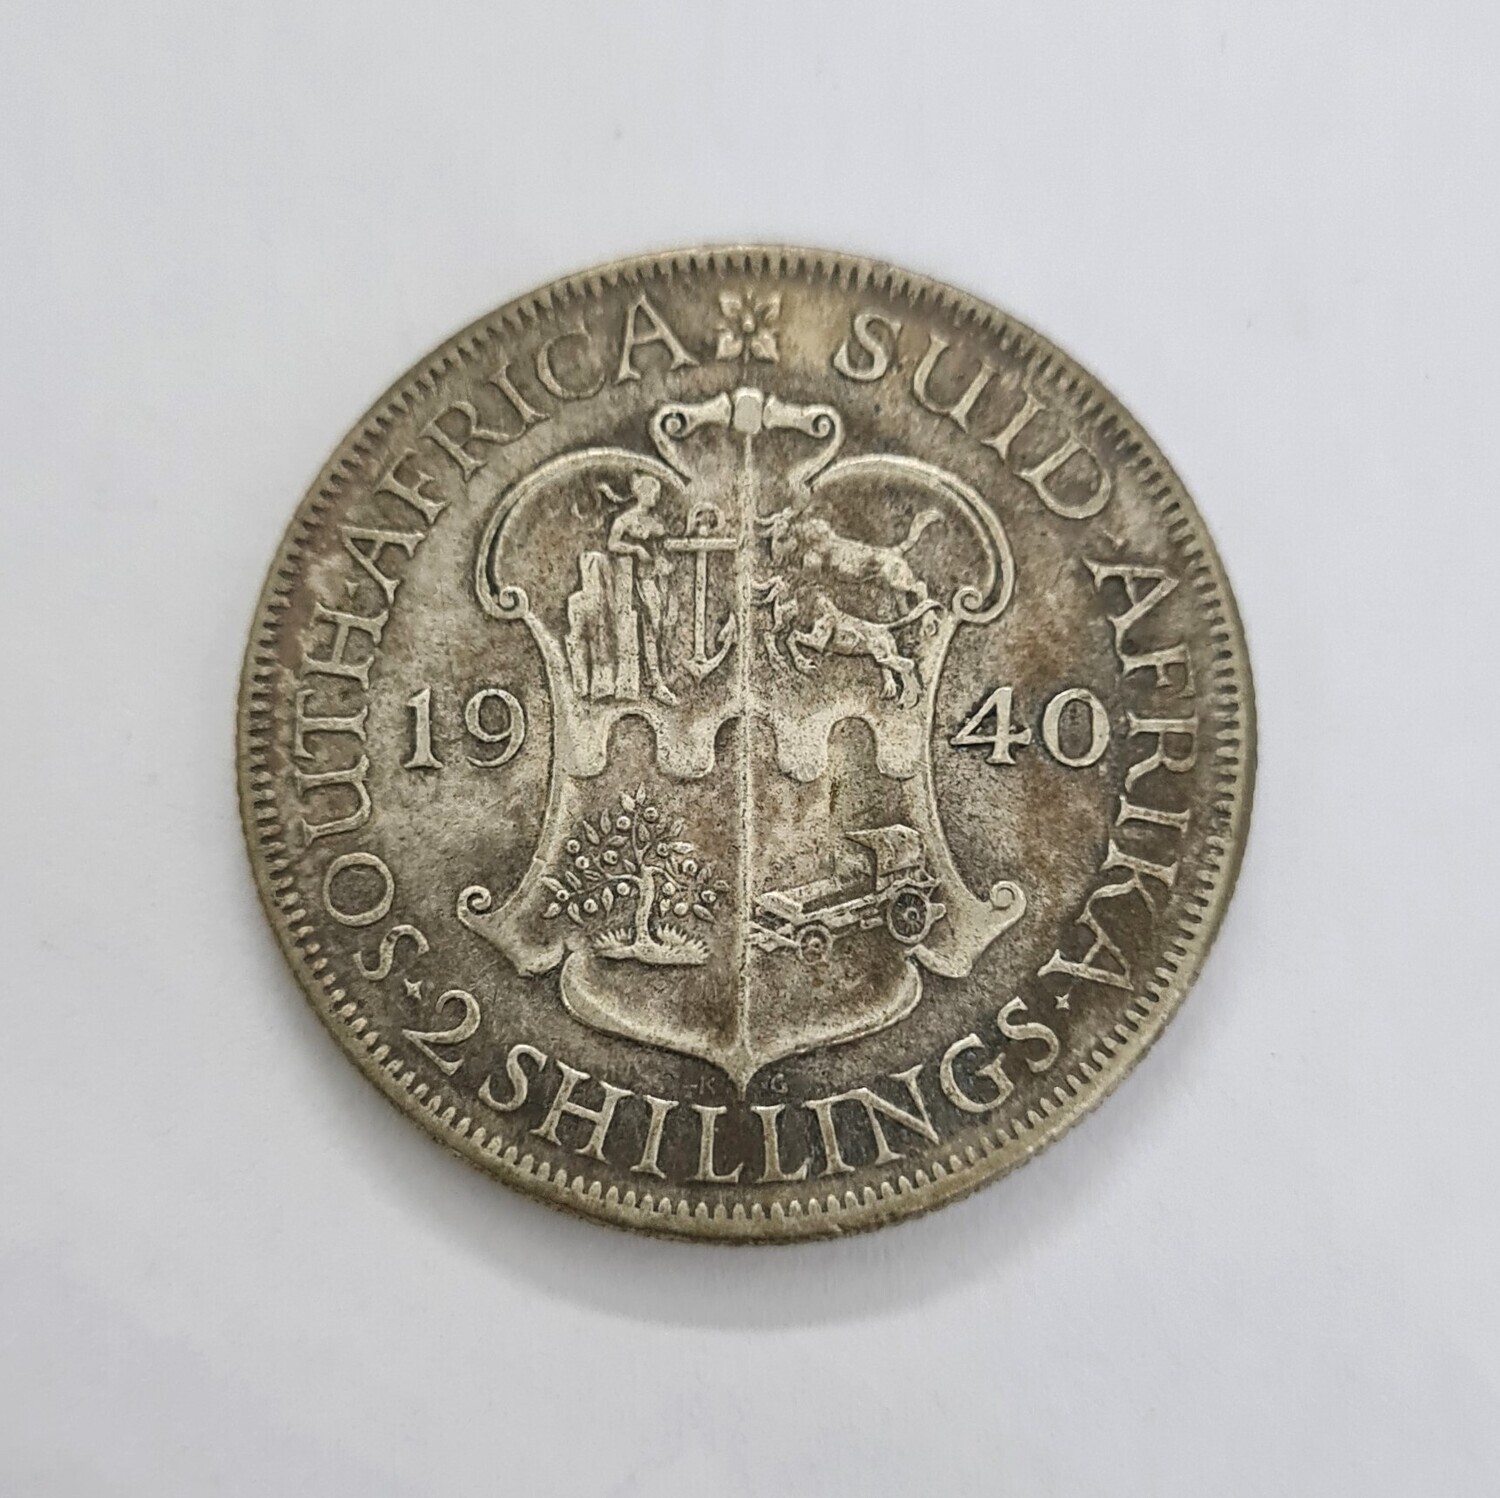 SOUTH AFRICA 2 SHILLINGS - GEORGE VI -1940